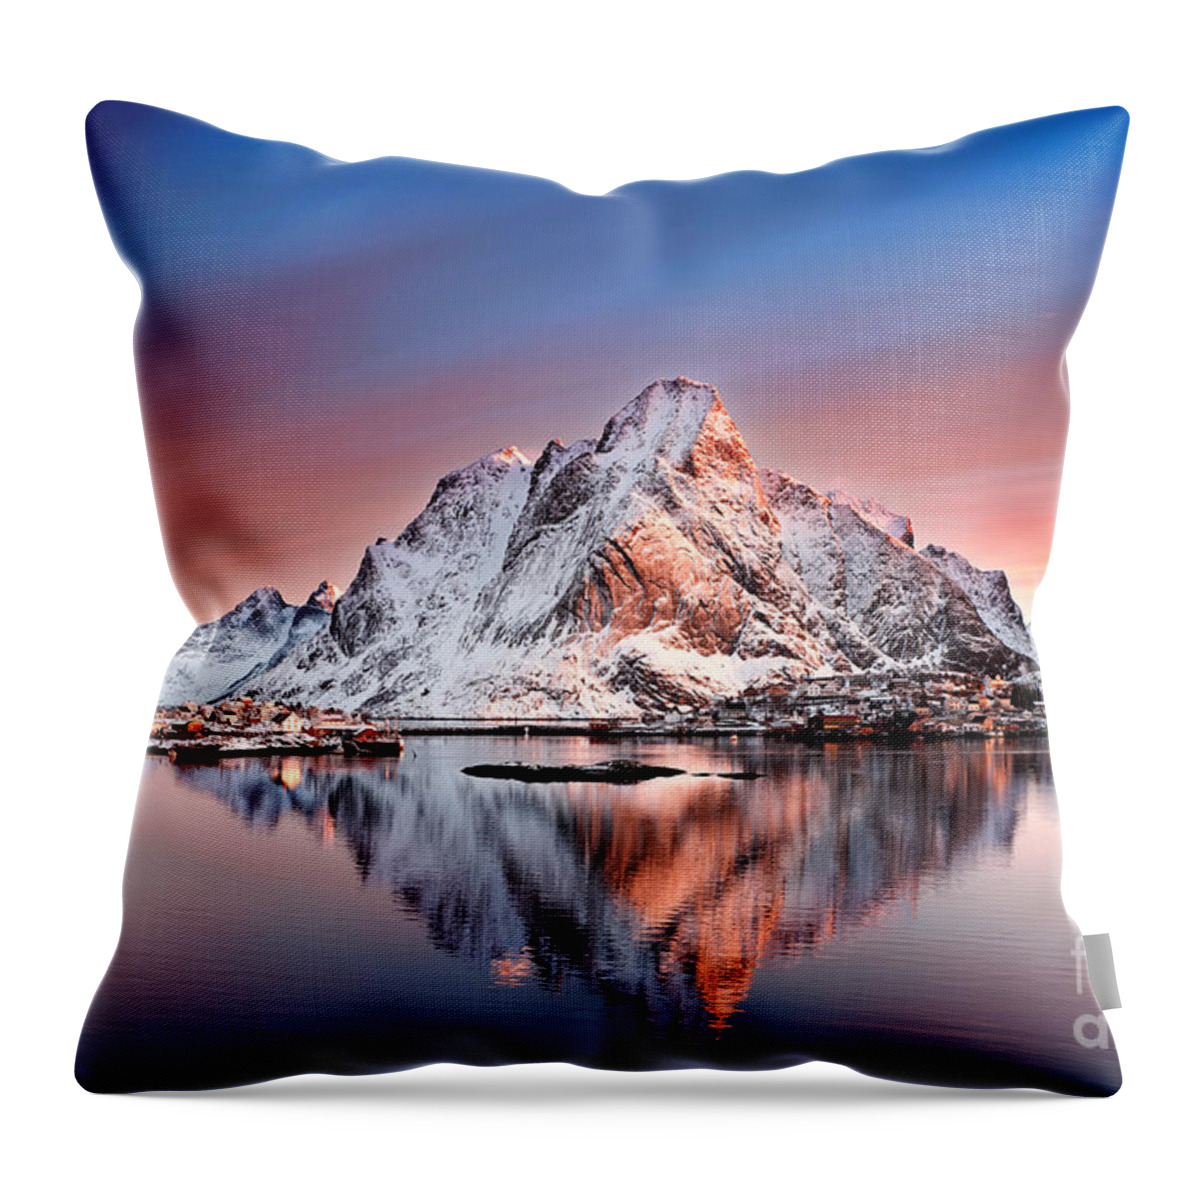 2012 Throw Pillow featuring the photograph Arctic Dawn Over Reine Village by Janet Burdon